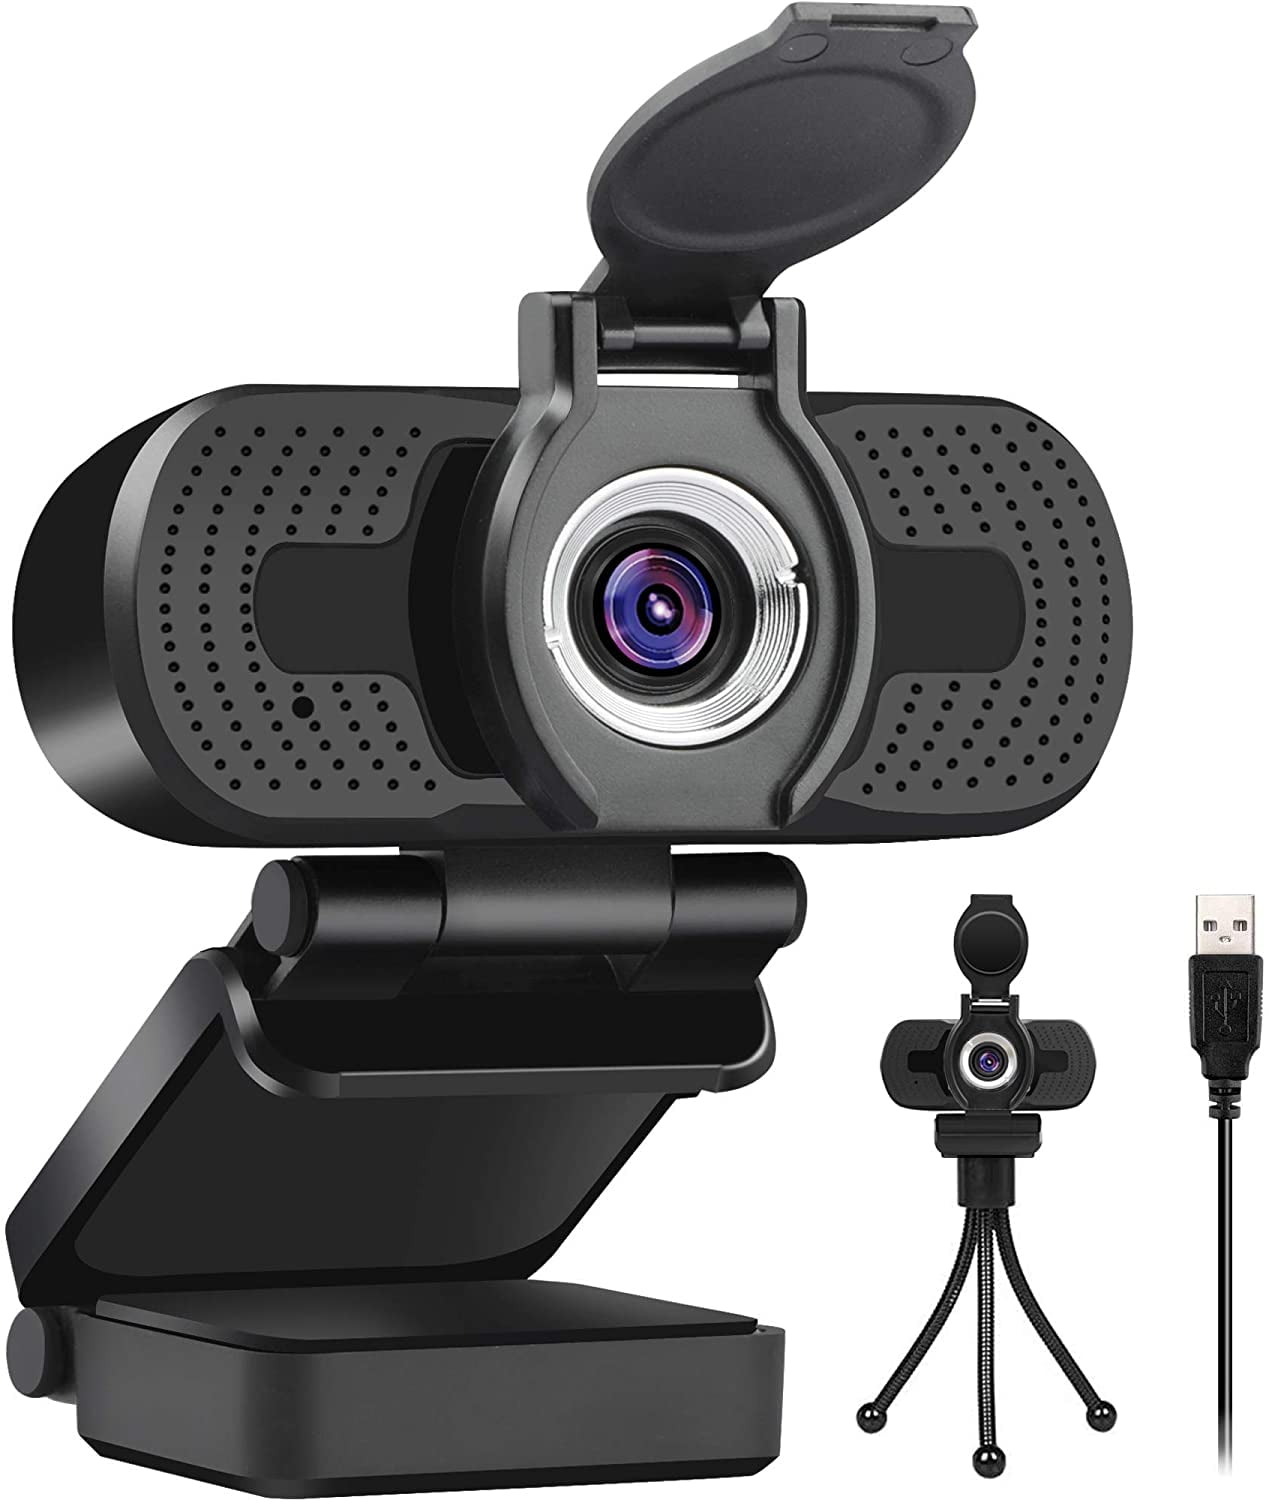 TOP-MAX Webcam Web Camera for Skype with Built-in Microphone USB Plug and Play Video Camera for Conferences for Desktop Video Calls PC Notebook 